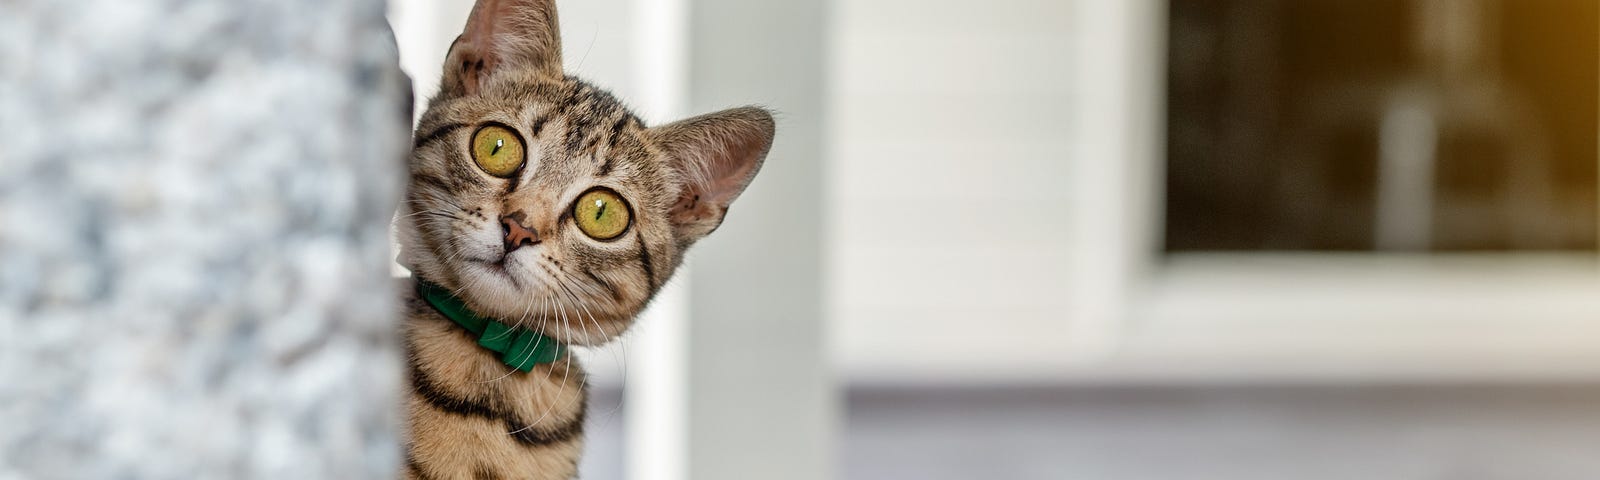 A brown tabby cat peeking from behind a wall